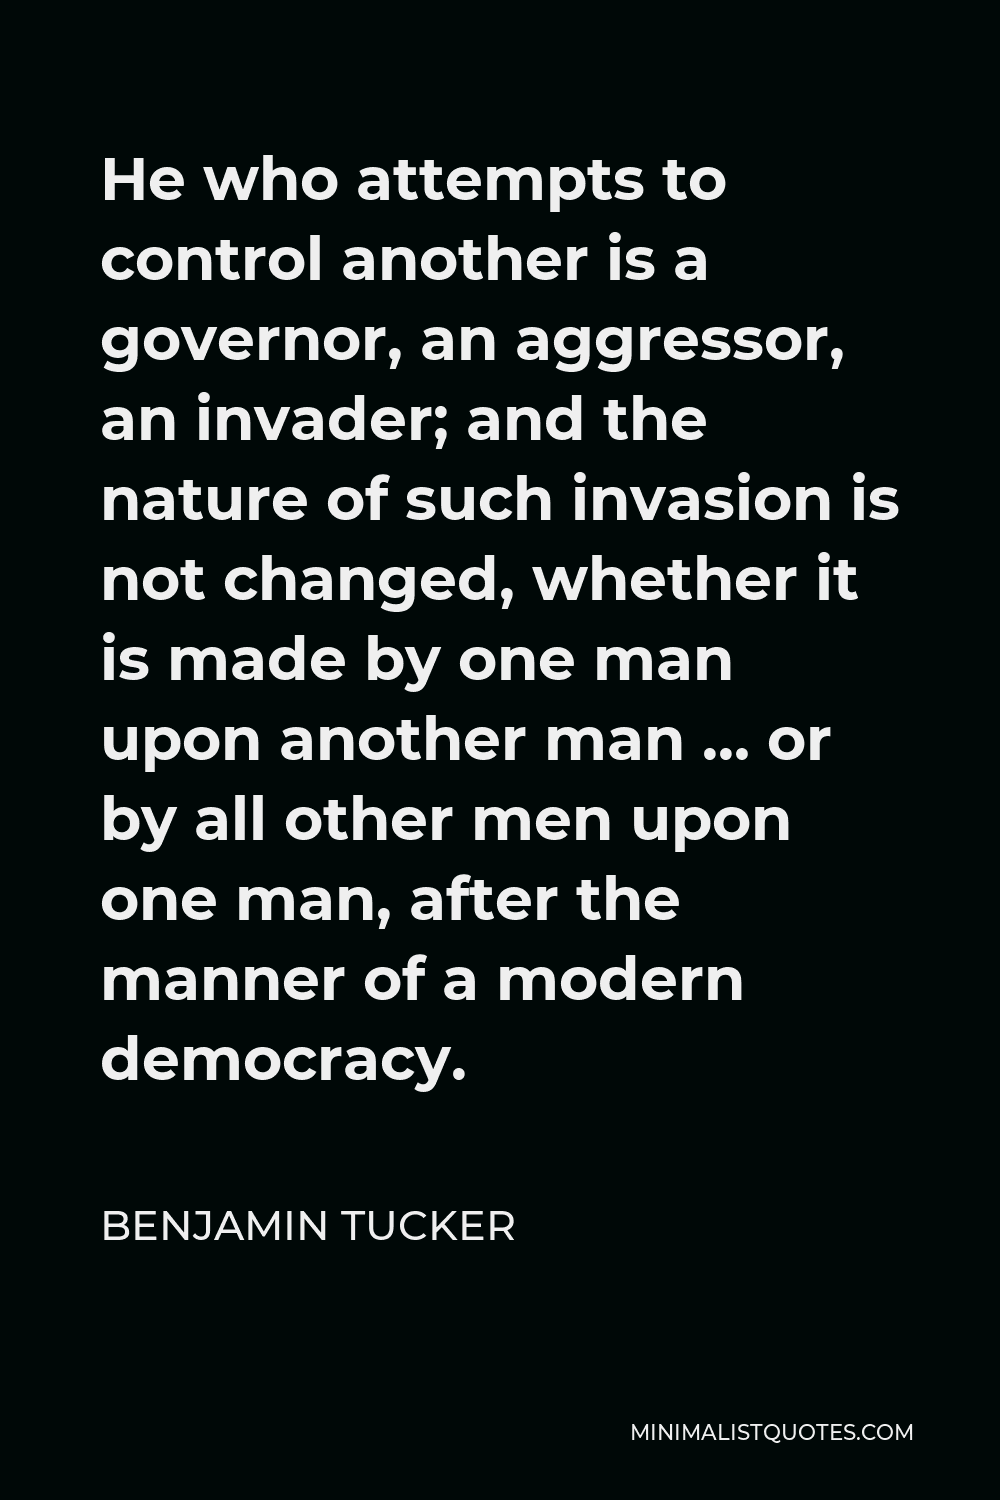 Benjamin Tucker Quote - He who attempts to control another is a governor, an aggressor, an invader; and the nature of such invasion is not changed, whether it is made by one man upon another man,